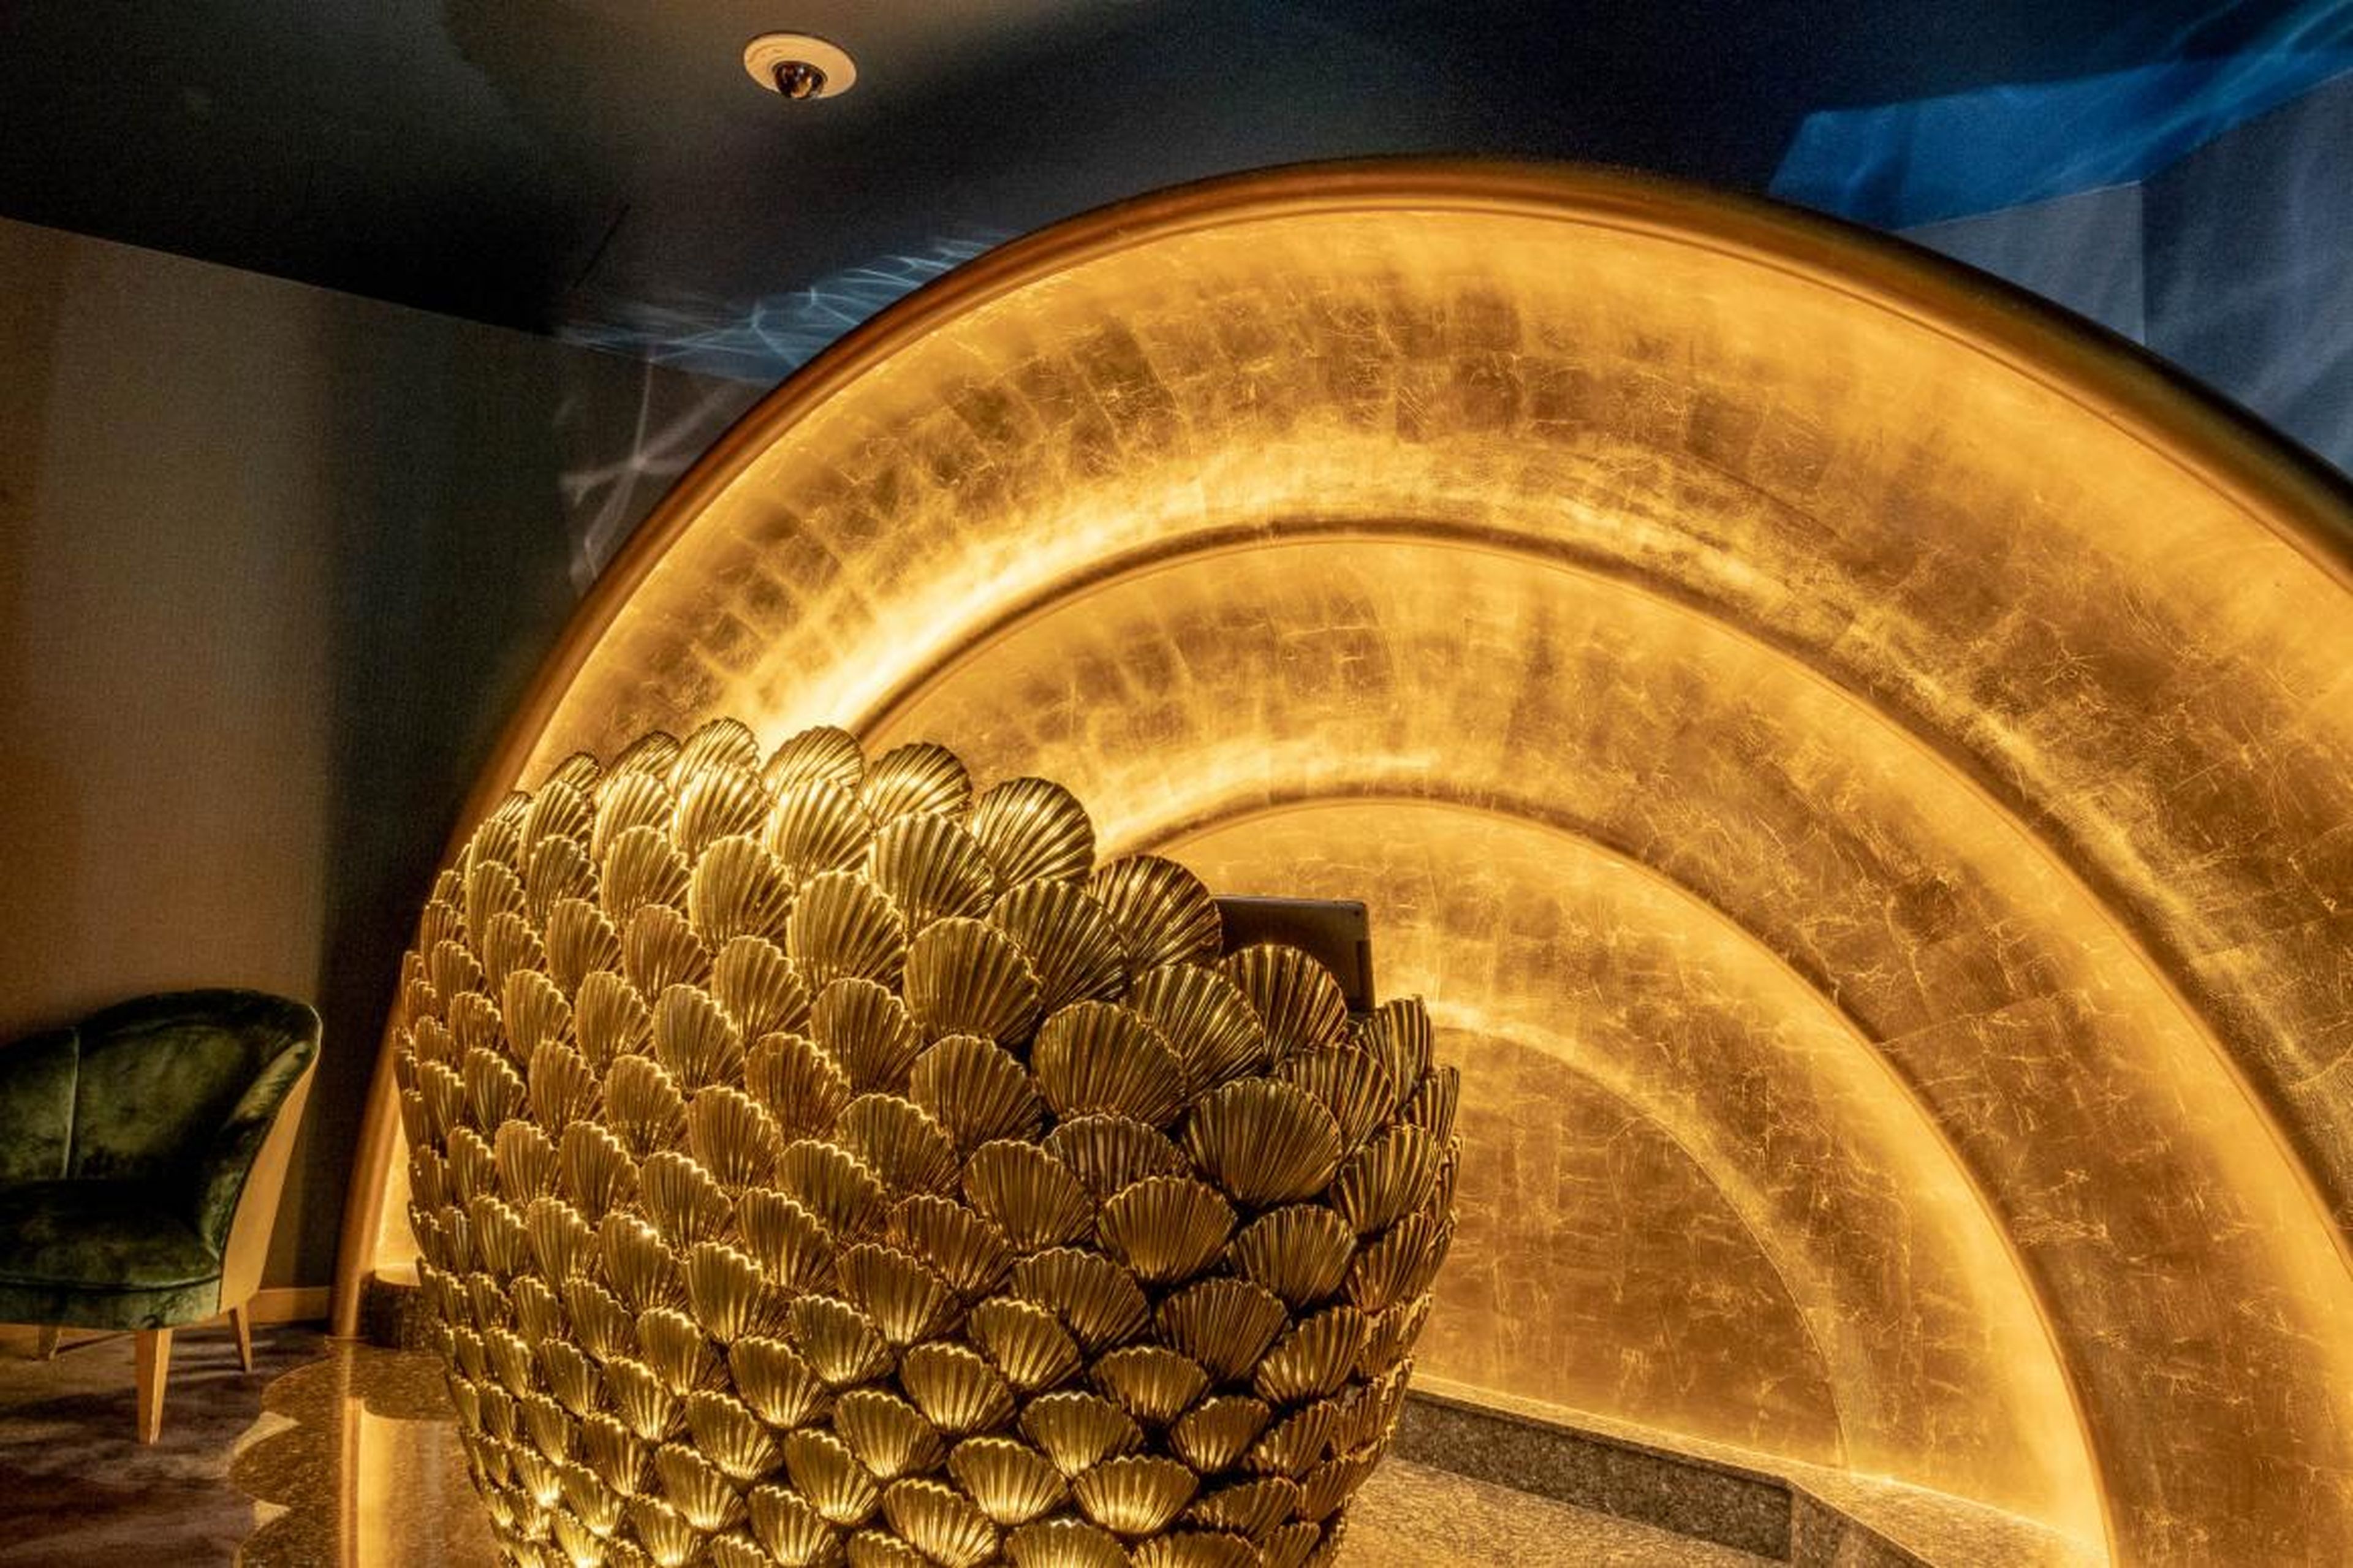 For dinner, I had a reservation at the Burj's flagship restaurant, Al Mahara. If it wasn't clear from the giant gold seashell that serves as the host stand, Al Mahara is all about seafood.